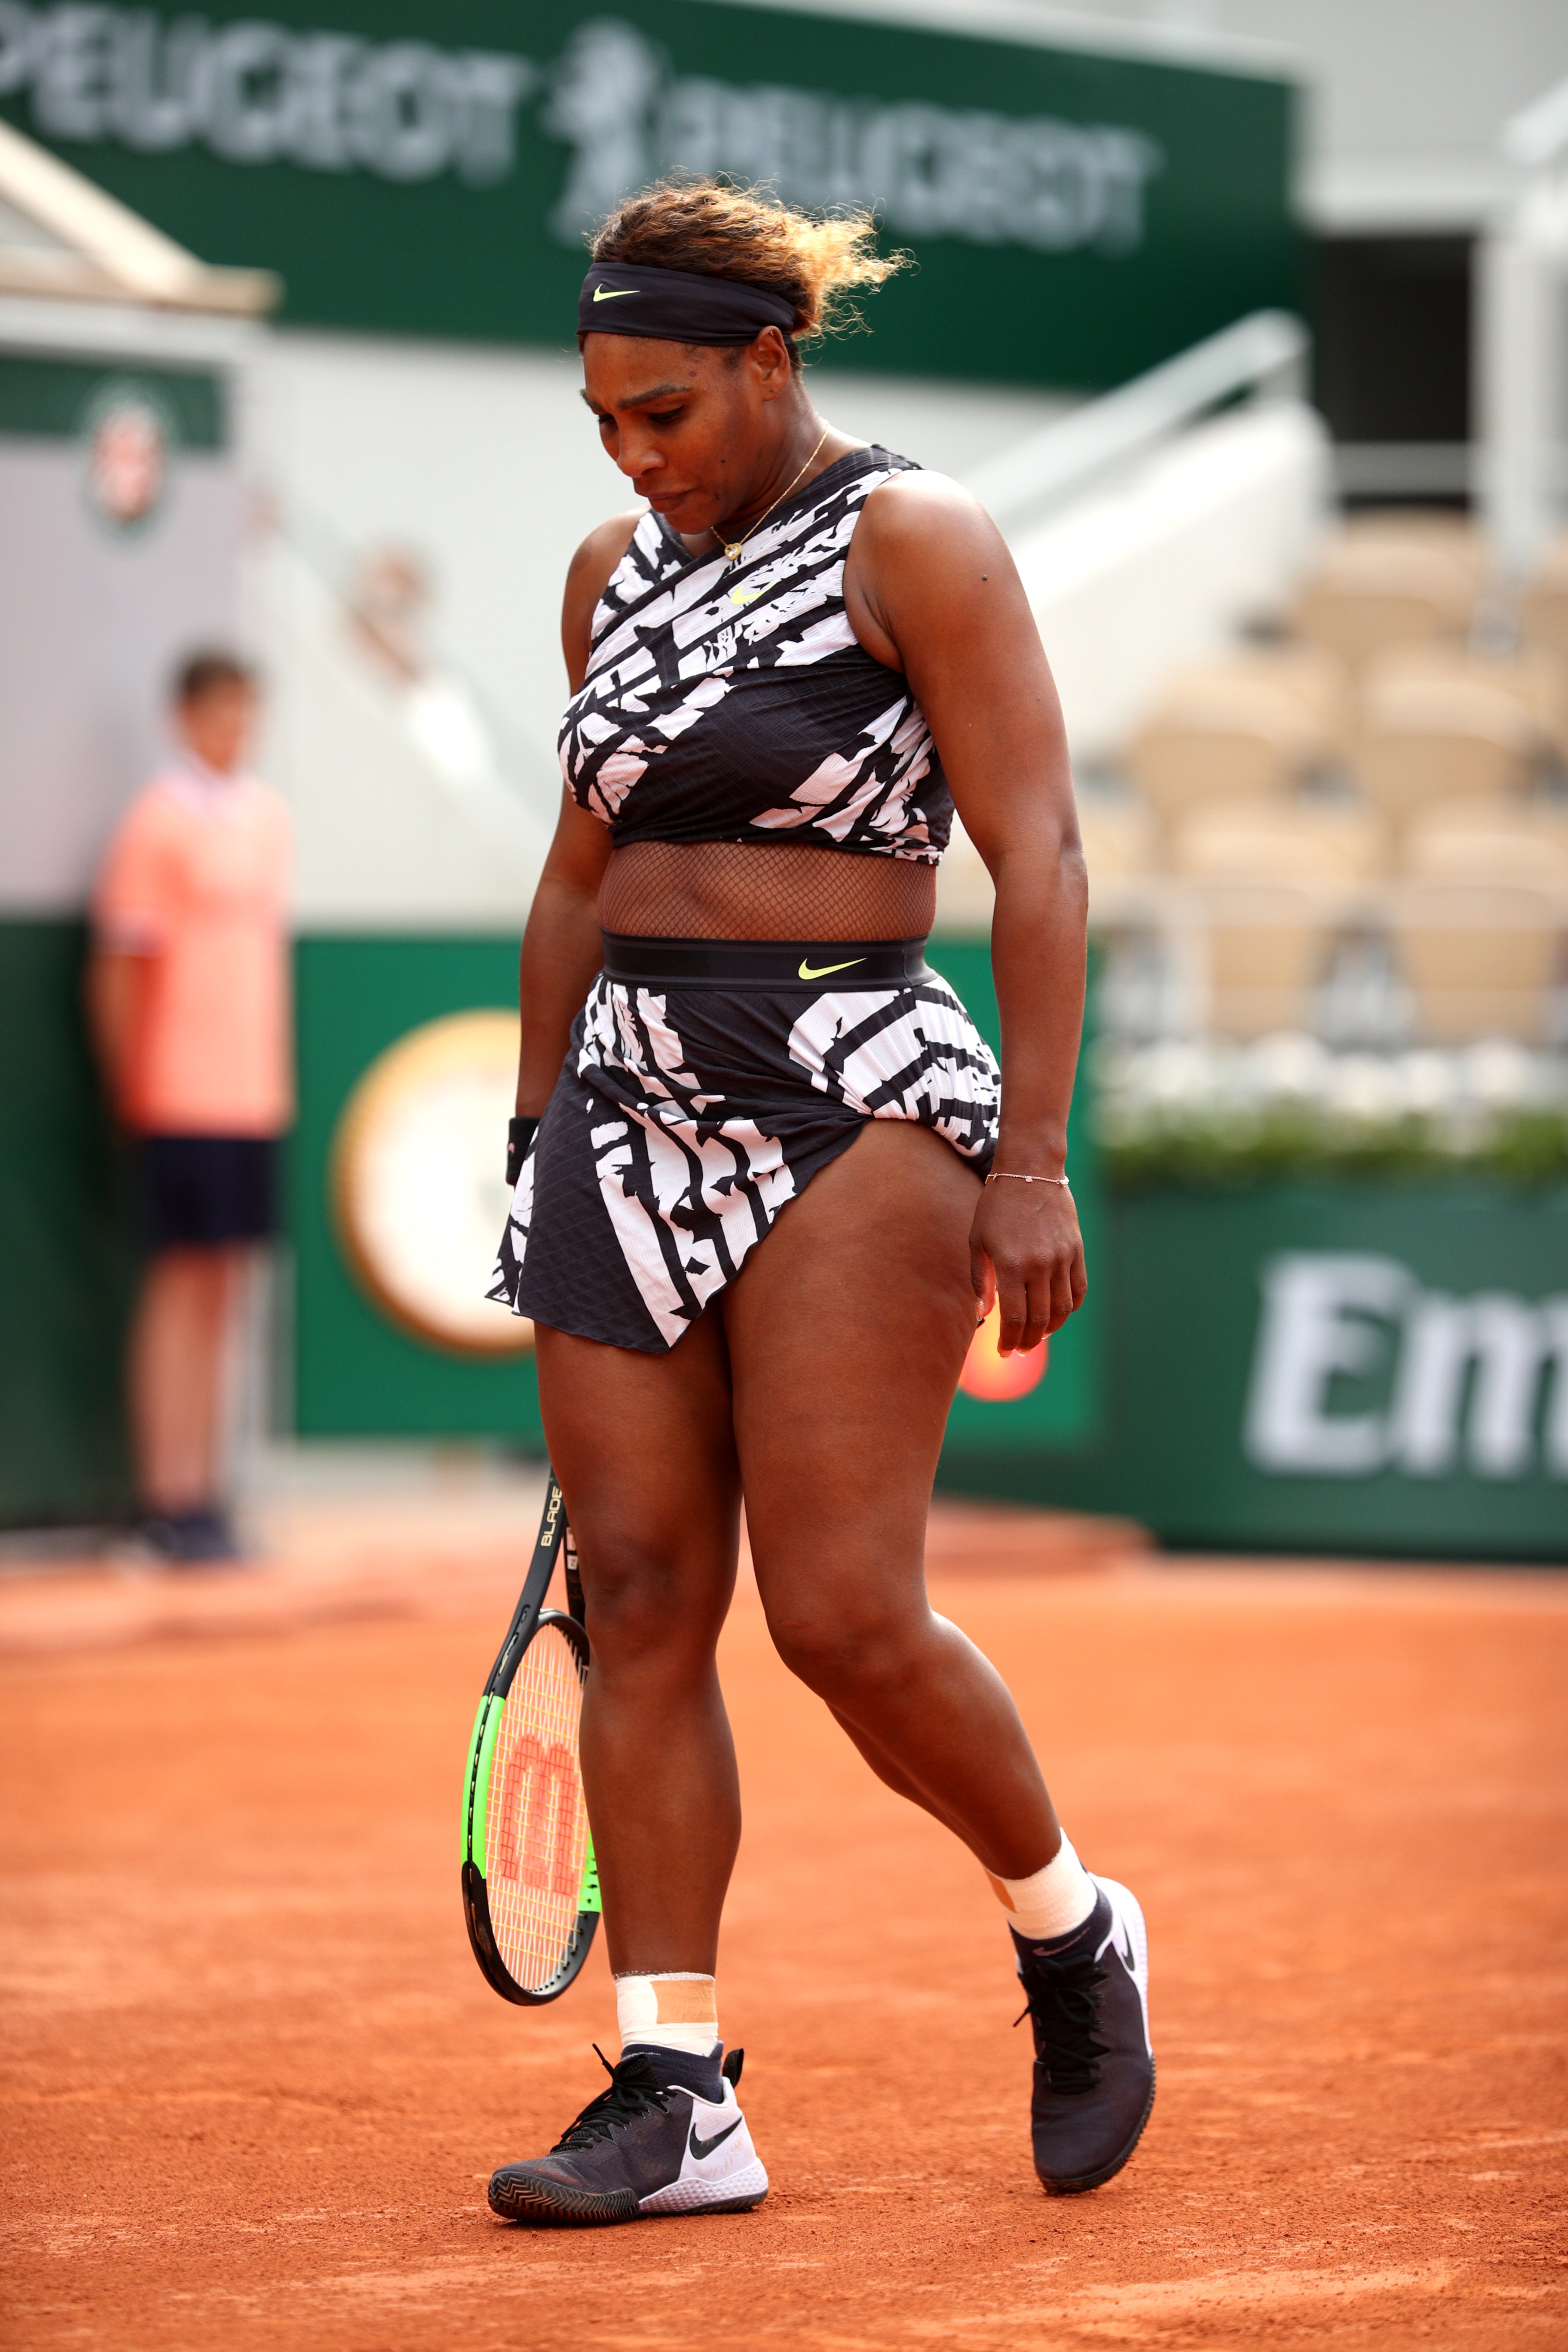 Serena Williams at the 2019 French Open at Roland Garros on May 27, 2019 in Paris, France. |Photo: Getty Images